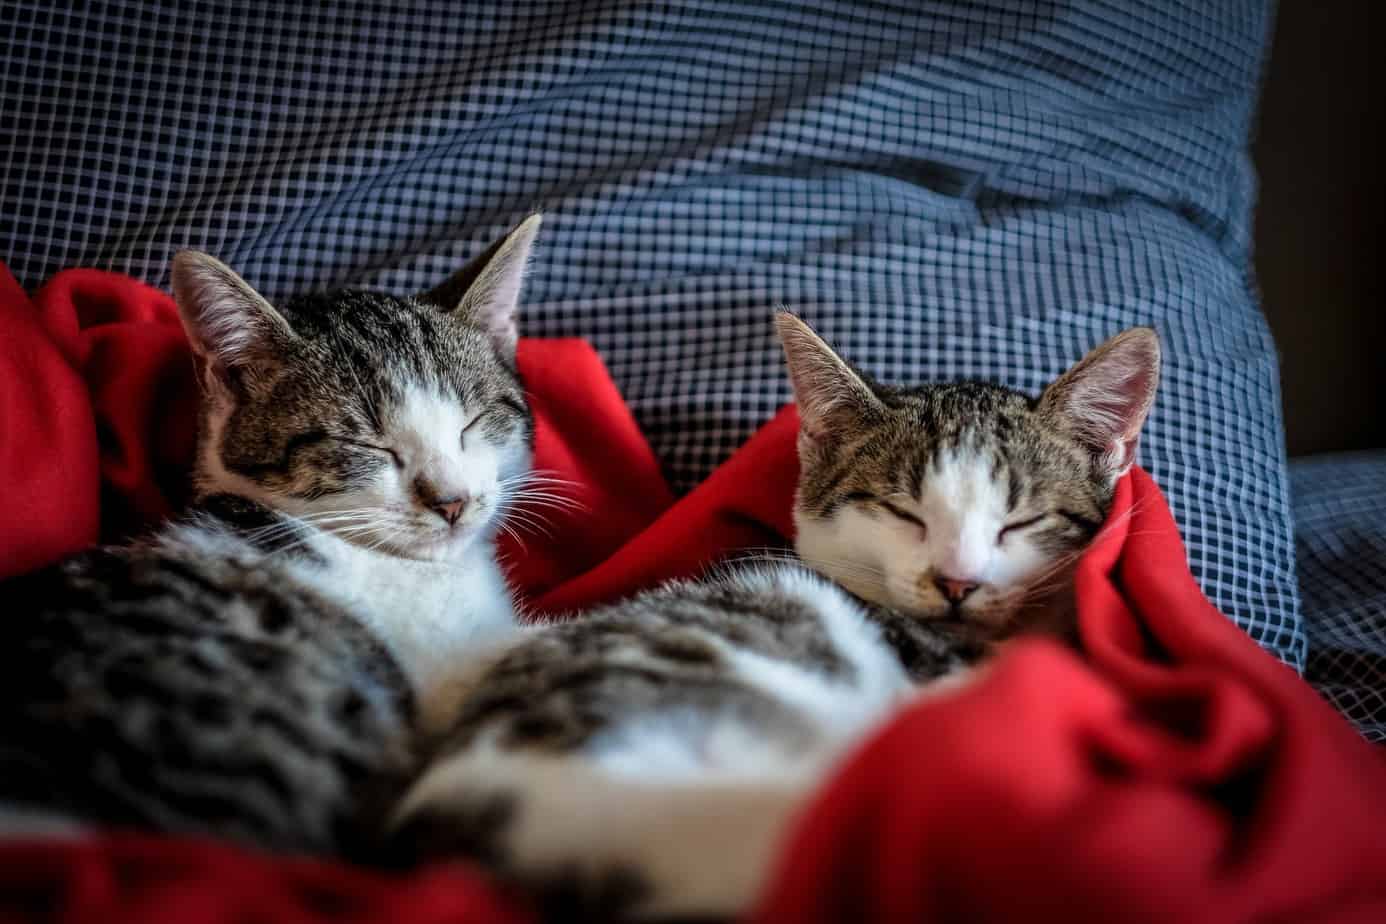 Explained: Why Cats Enjoy Sleeping Together